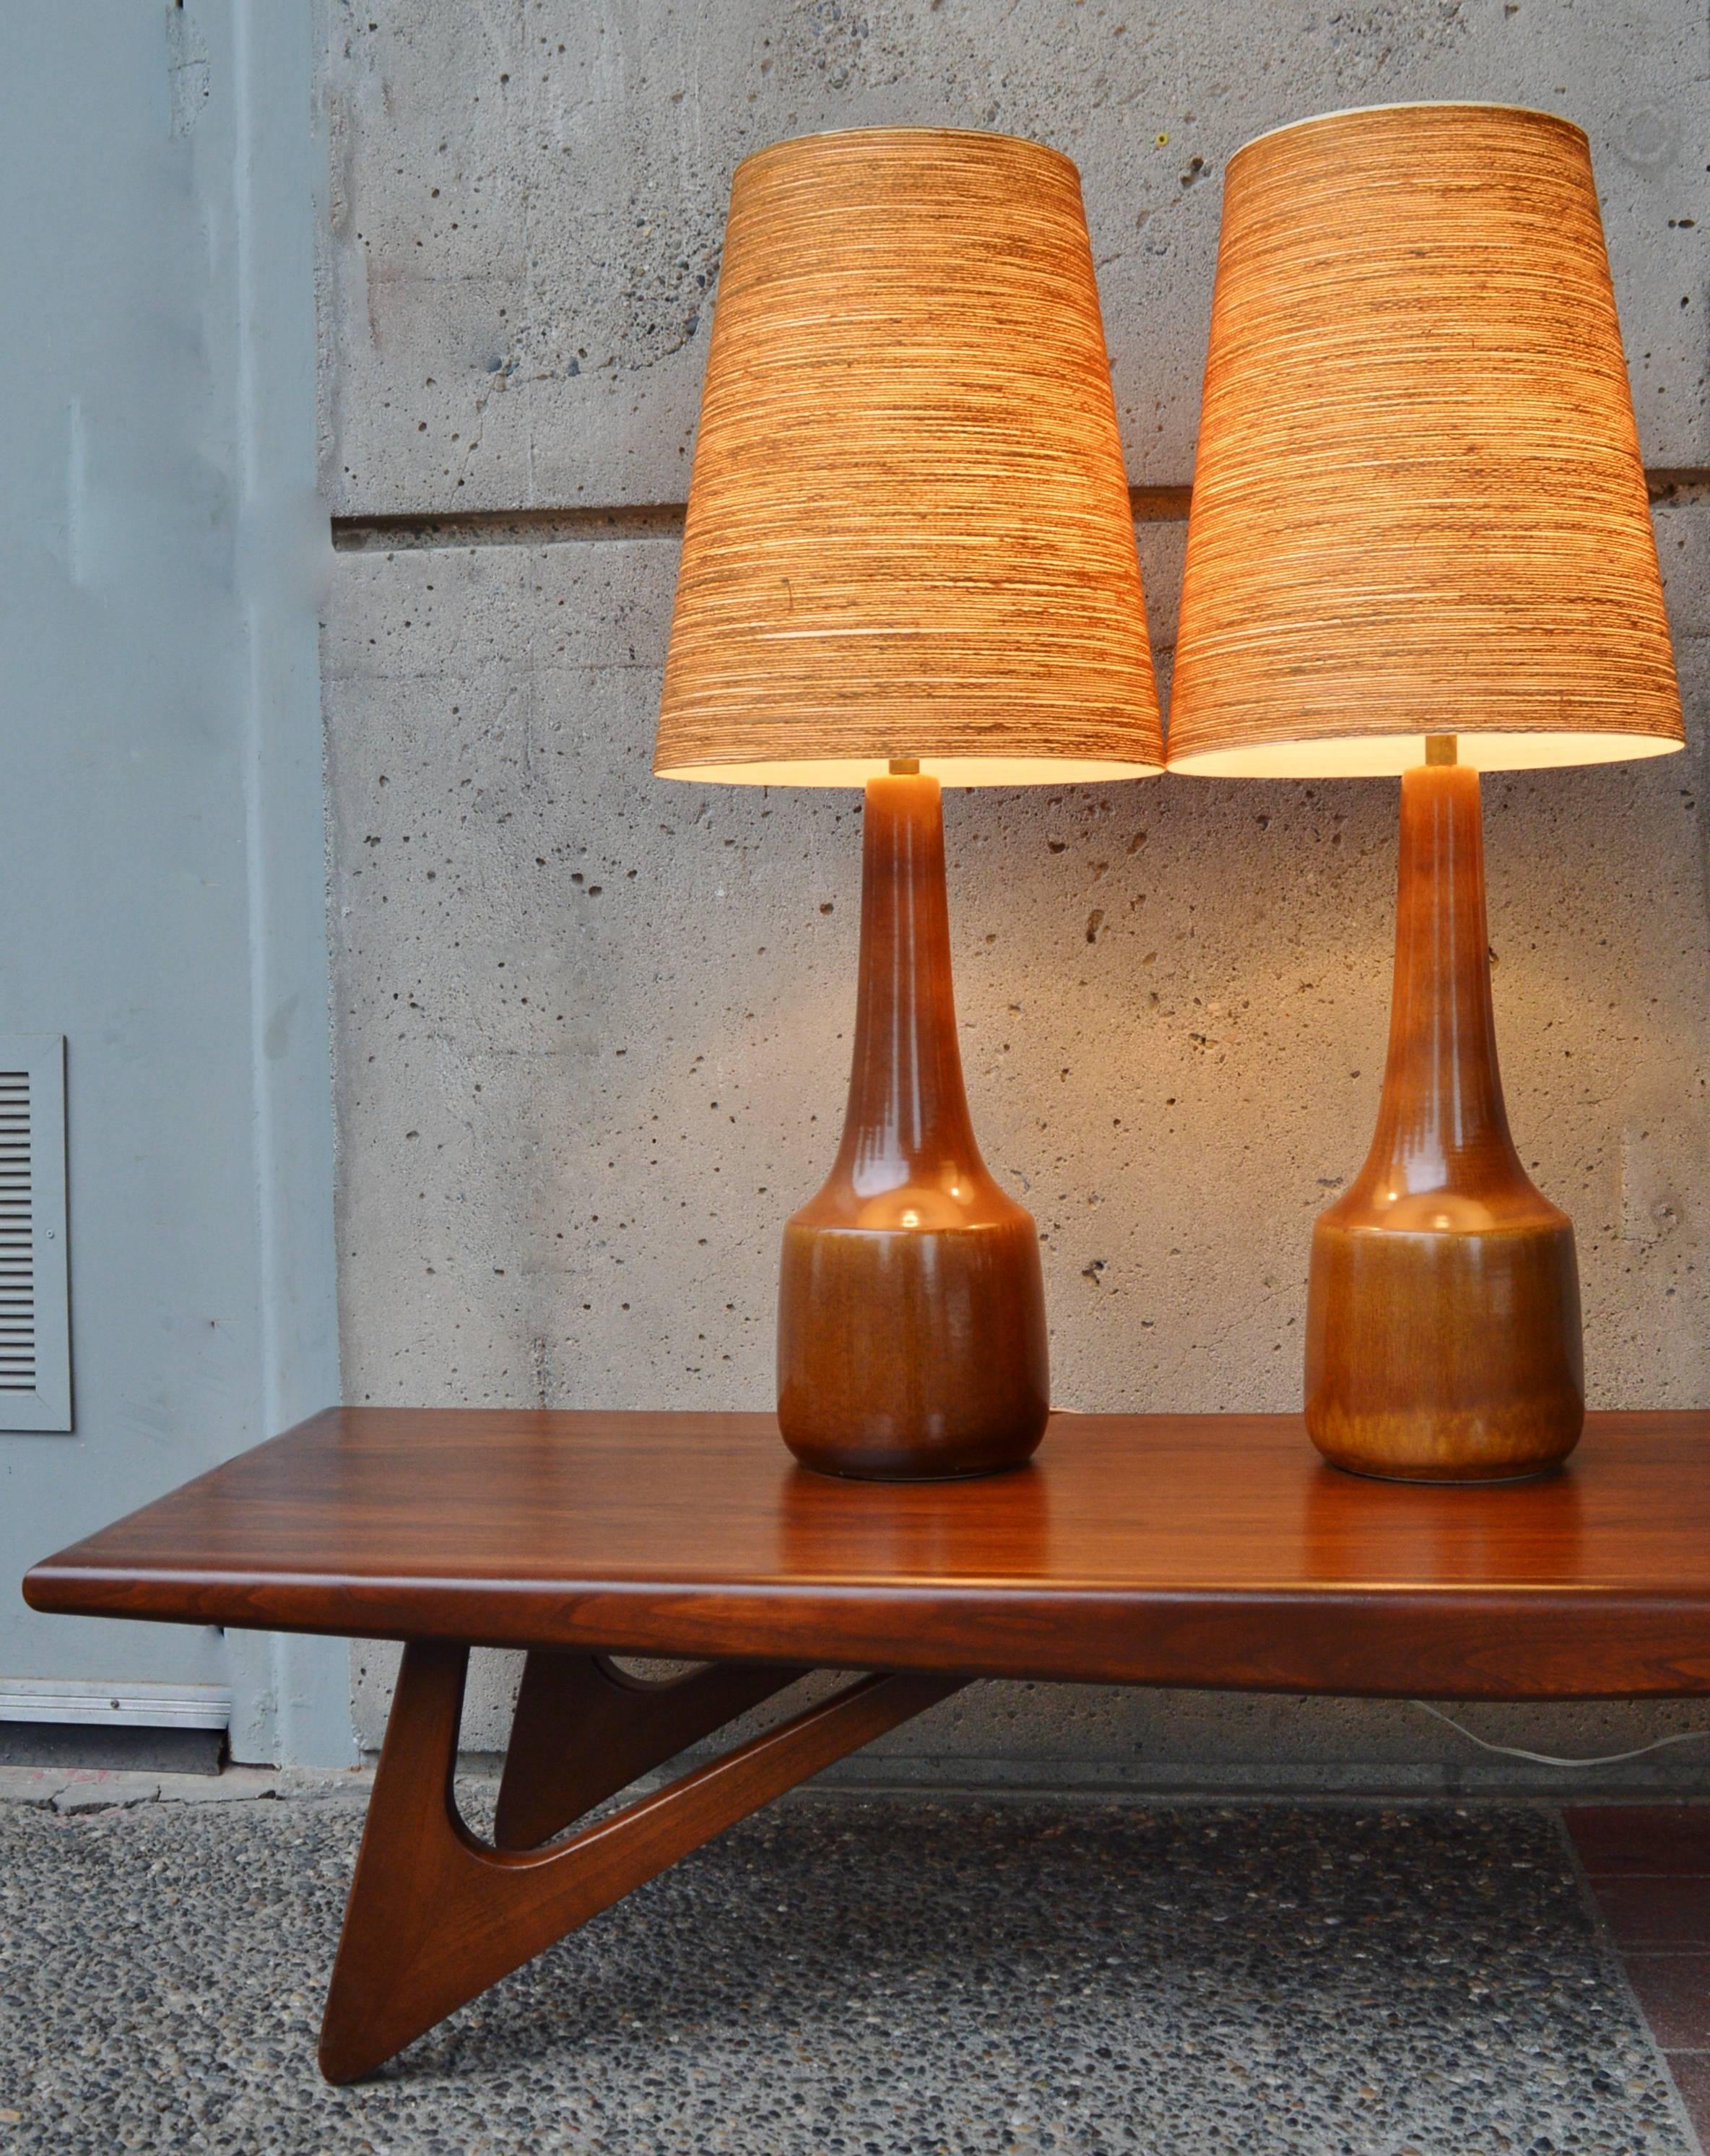 This stunning pair of tall ceramic lamps were handcrafted in the 1960s by Danish potters Lotte & Gunnar Bostlund. The subtle glazing variations in caramel earth tones is spectacular. Featuring their three-tier original brass finials and uniquely